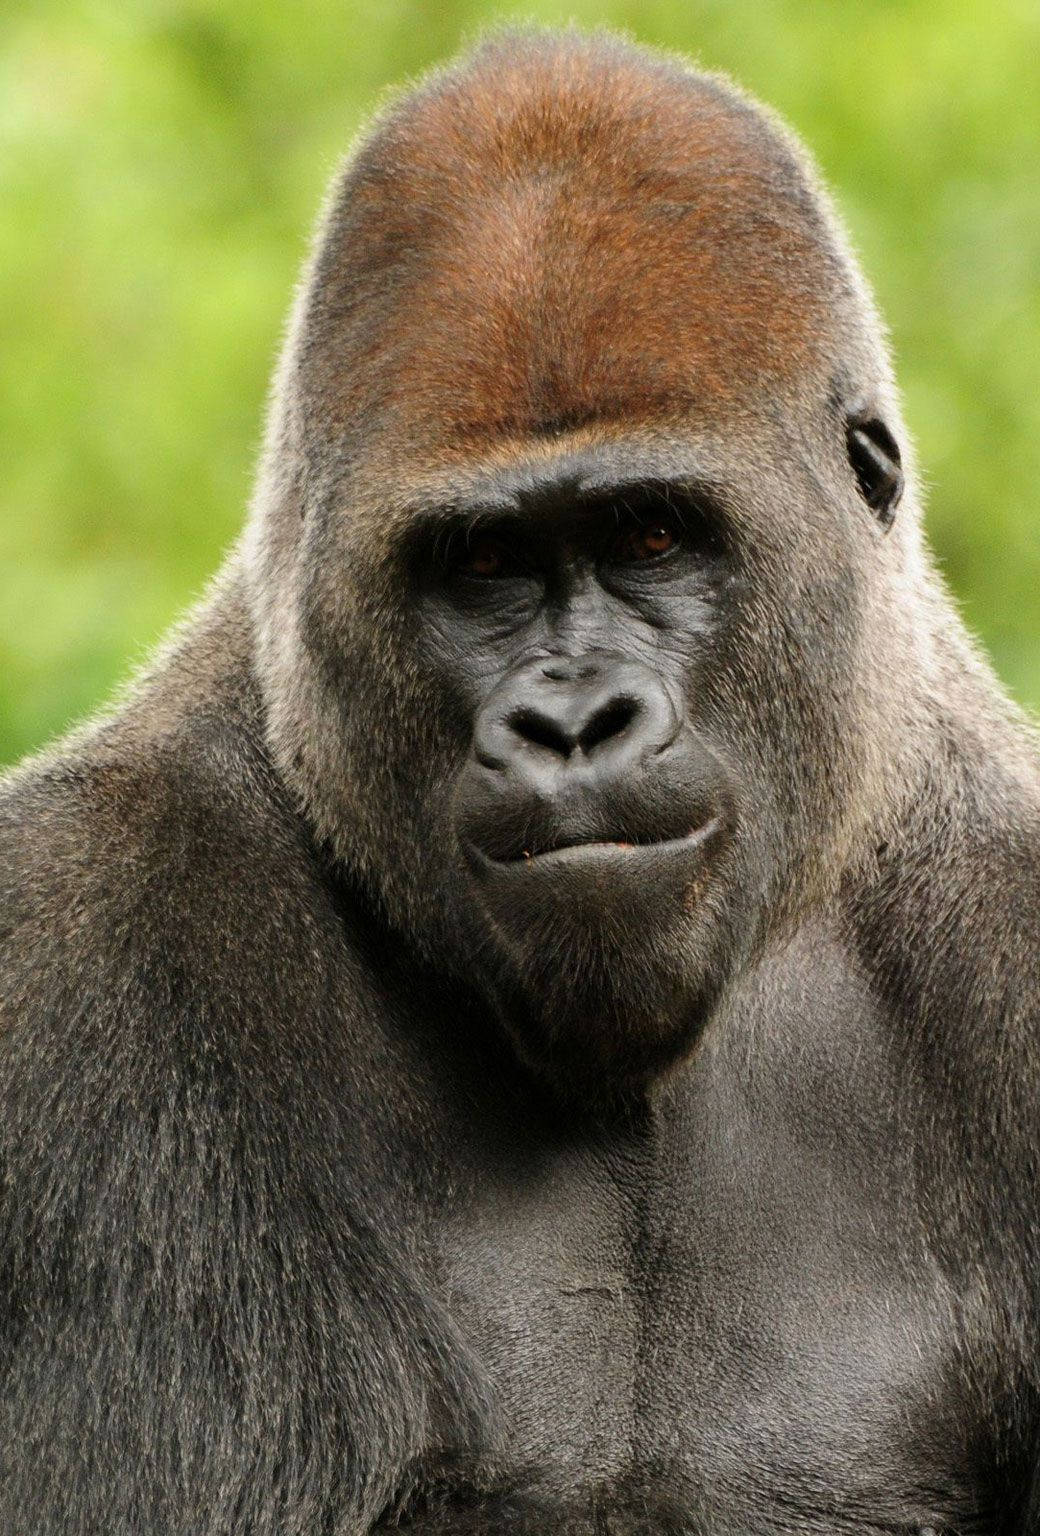 Serious-looking Gorilla Iphone Background